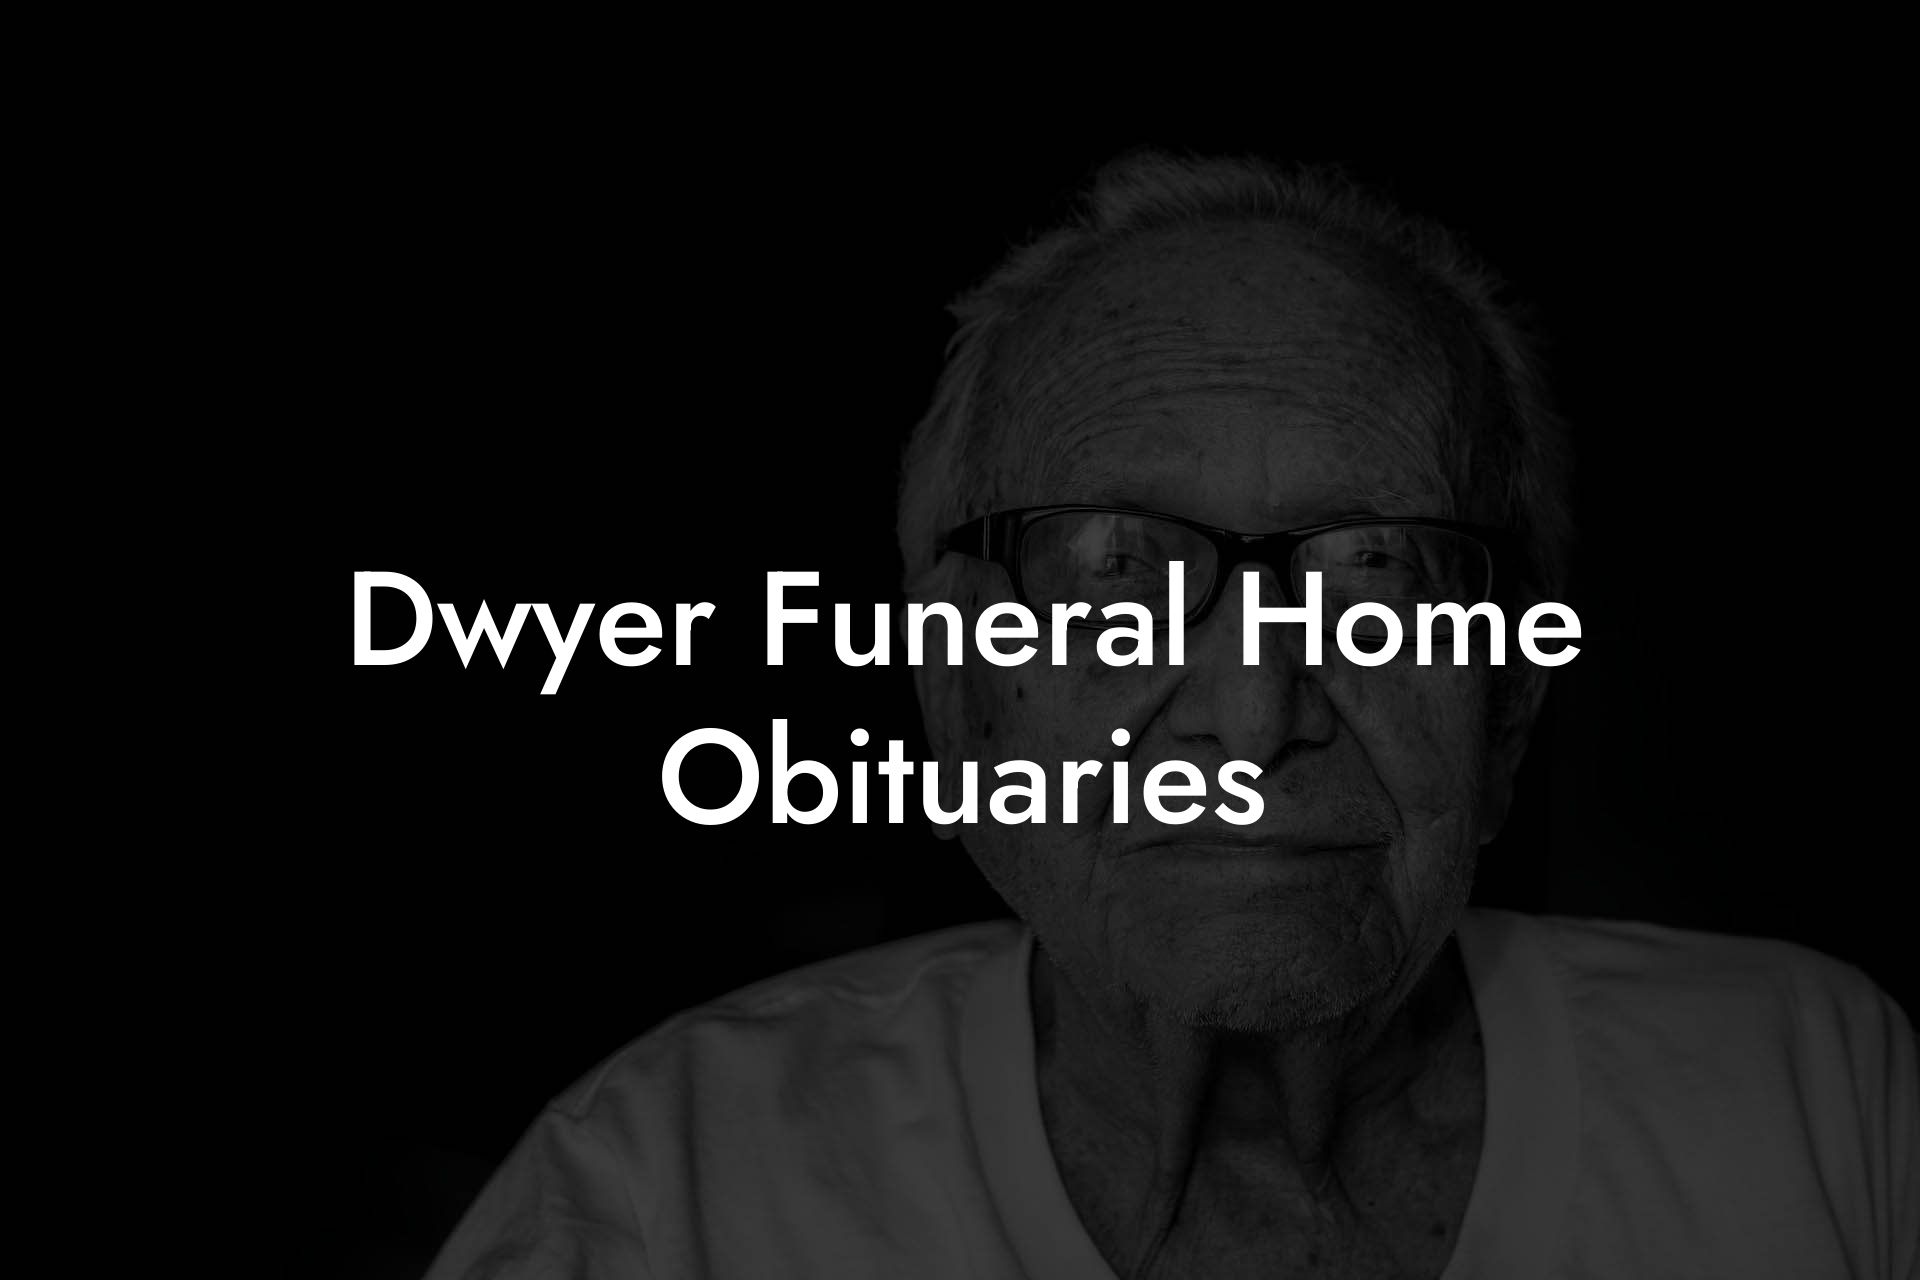 Dwyer Funeral Home Obituaries